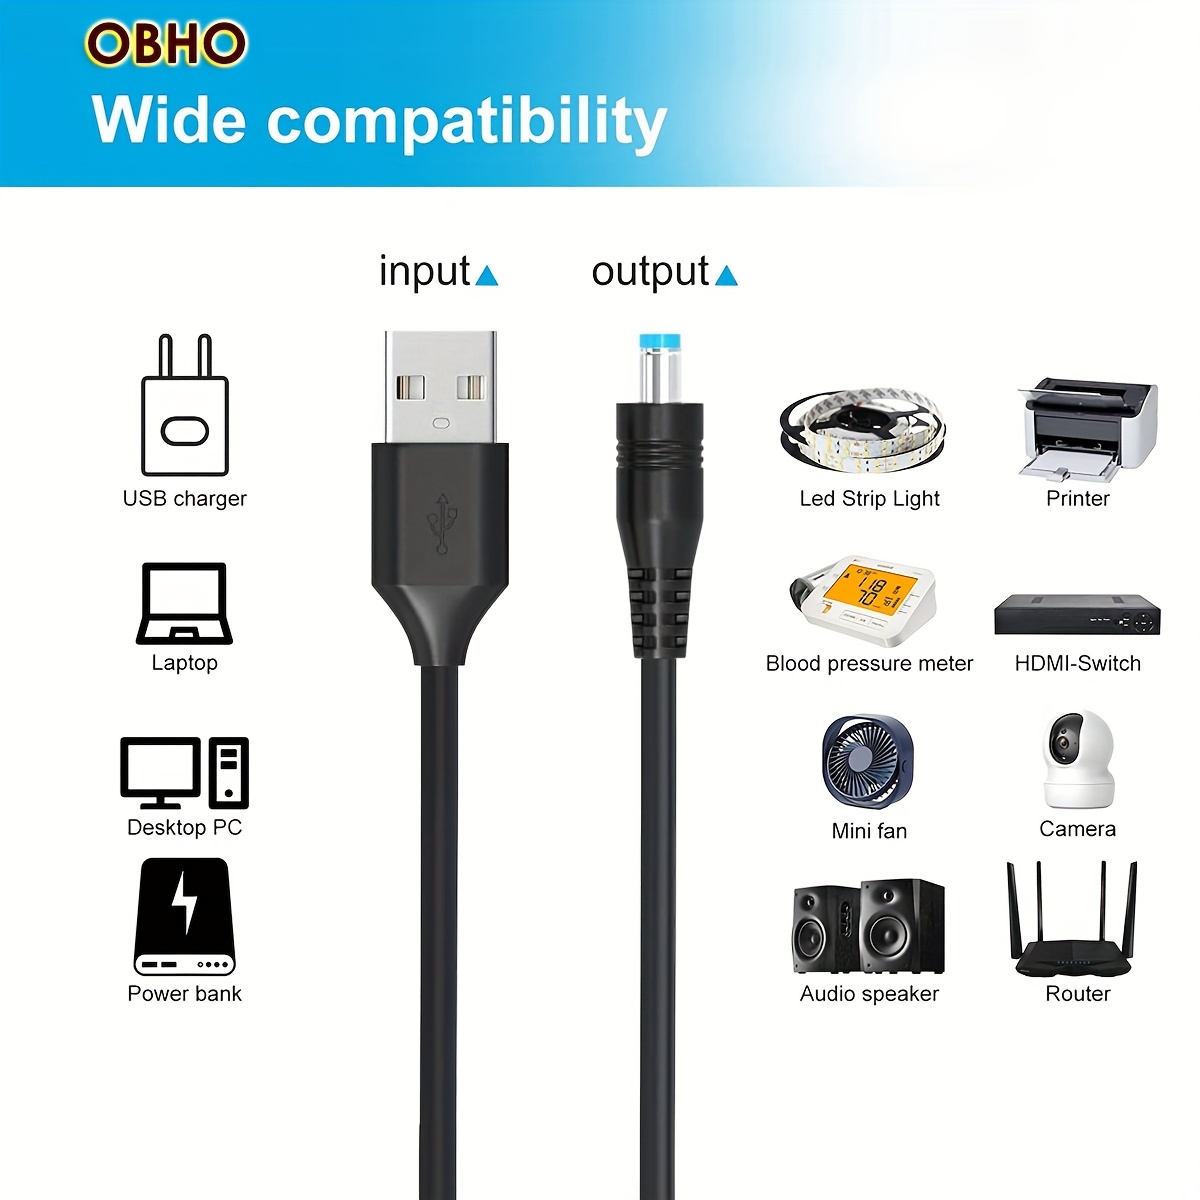 5V DC 5.5 2.1mm Jack Charging Cable Power Cord, USB to DC Power